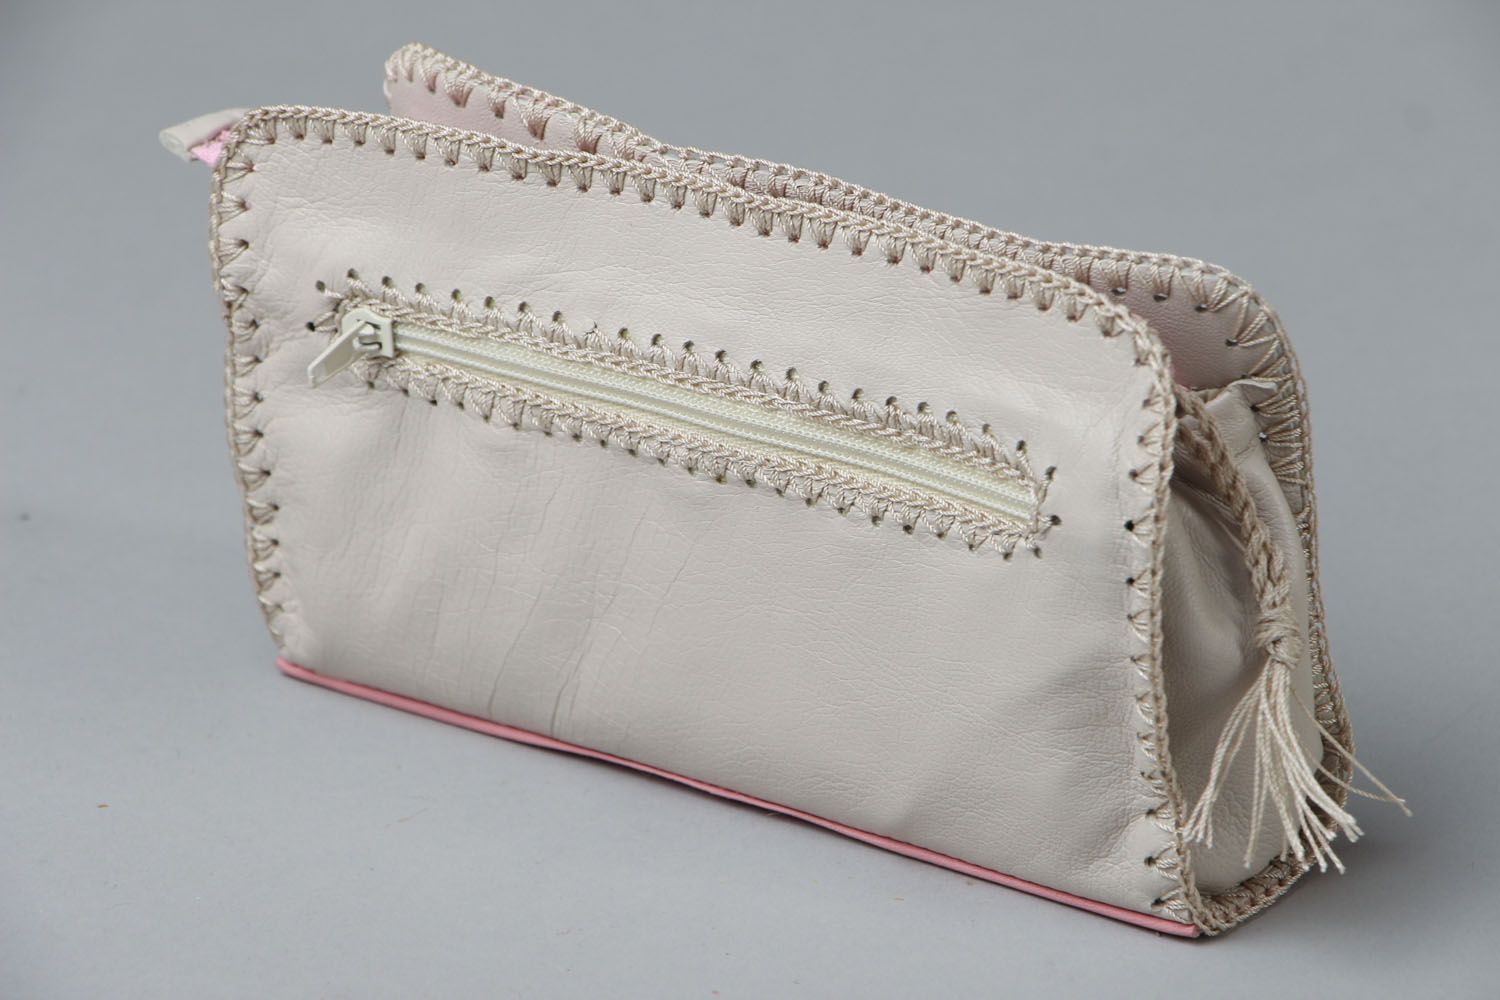 White and pink leather beauty bag photo 2